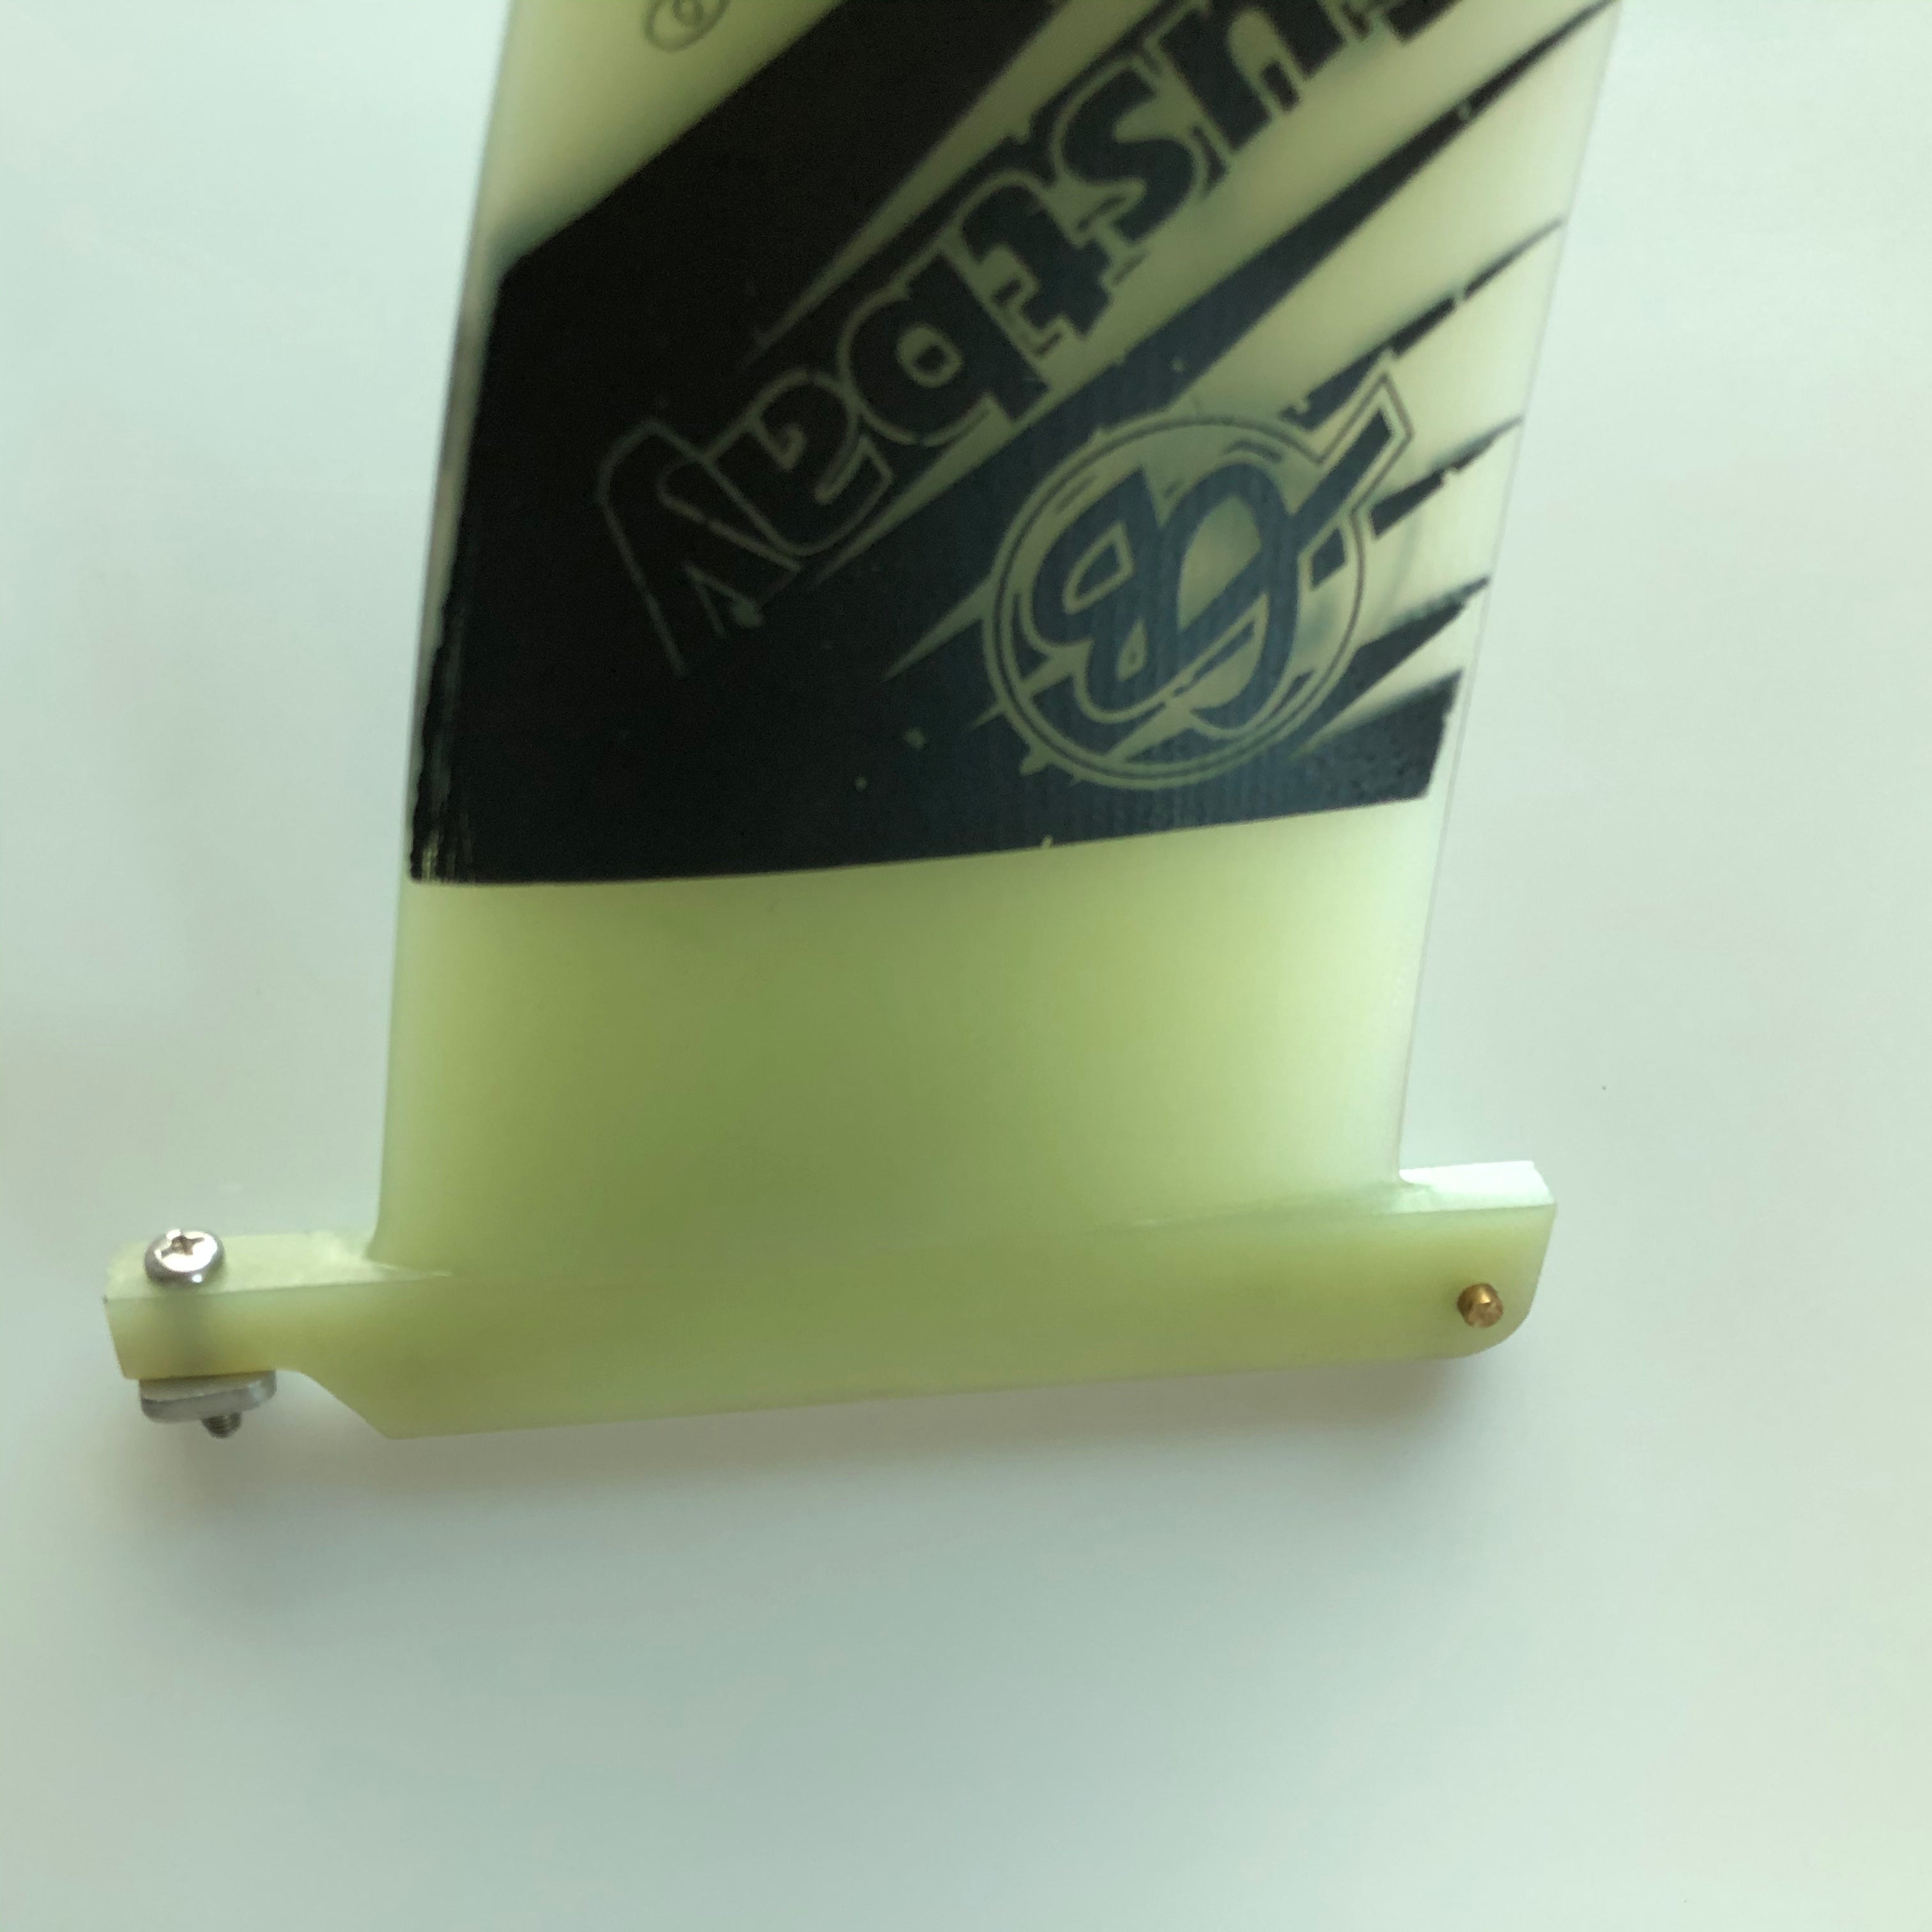 Gustbay Freewave G10 Fin 尾鰭US Box 卡槽 26/30cm（免運費） - Gustbay Windsurfing Accessories Gustbay